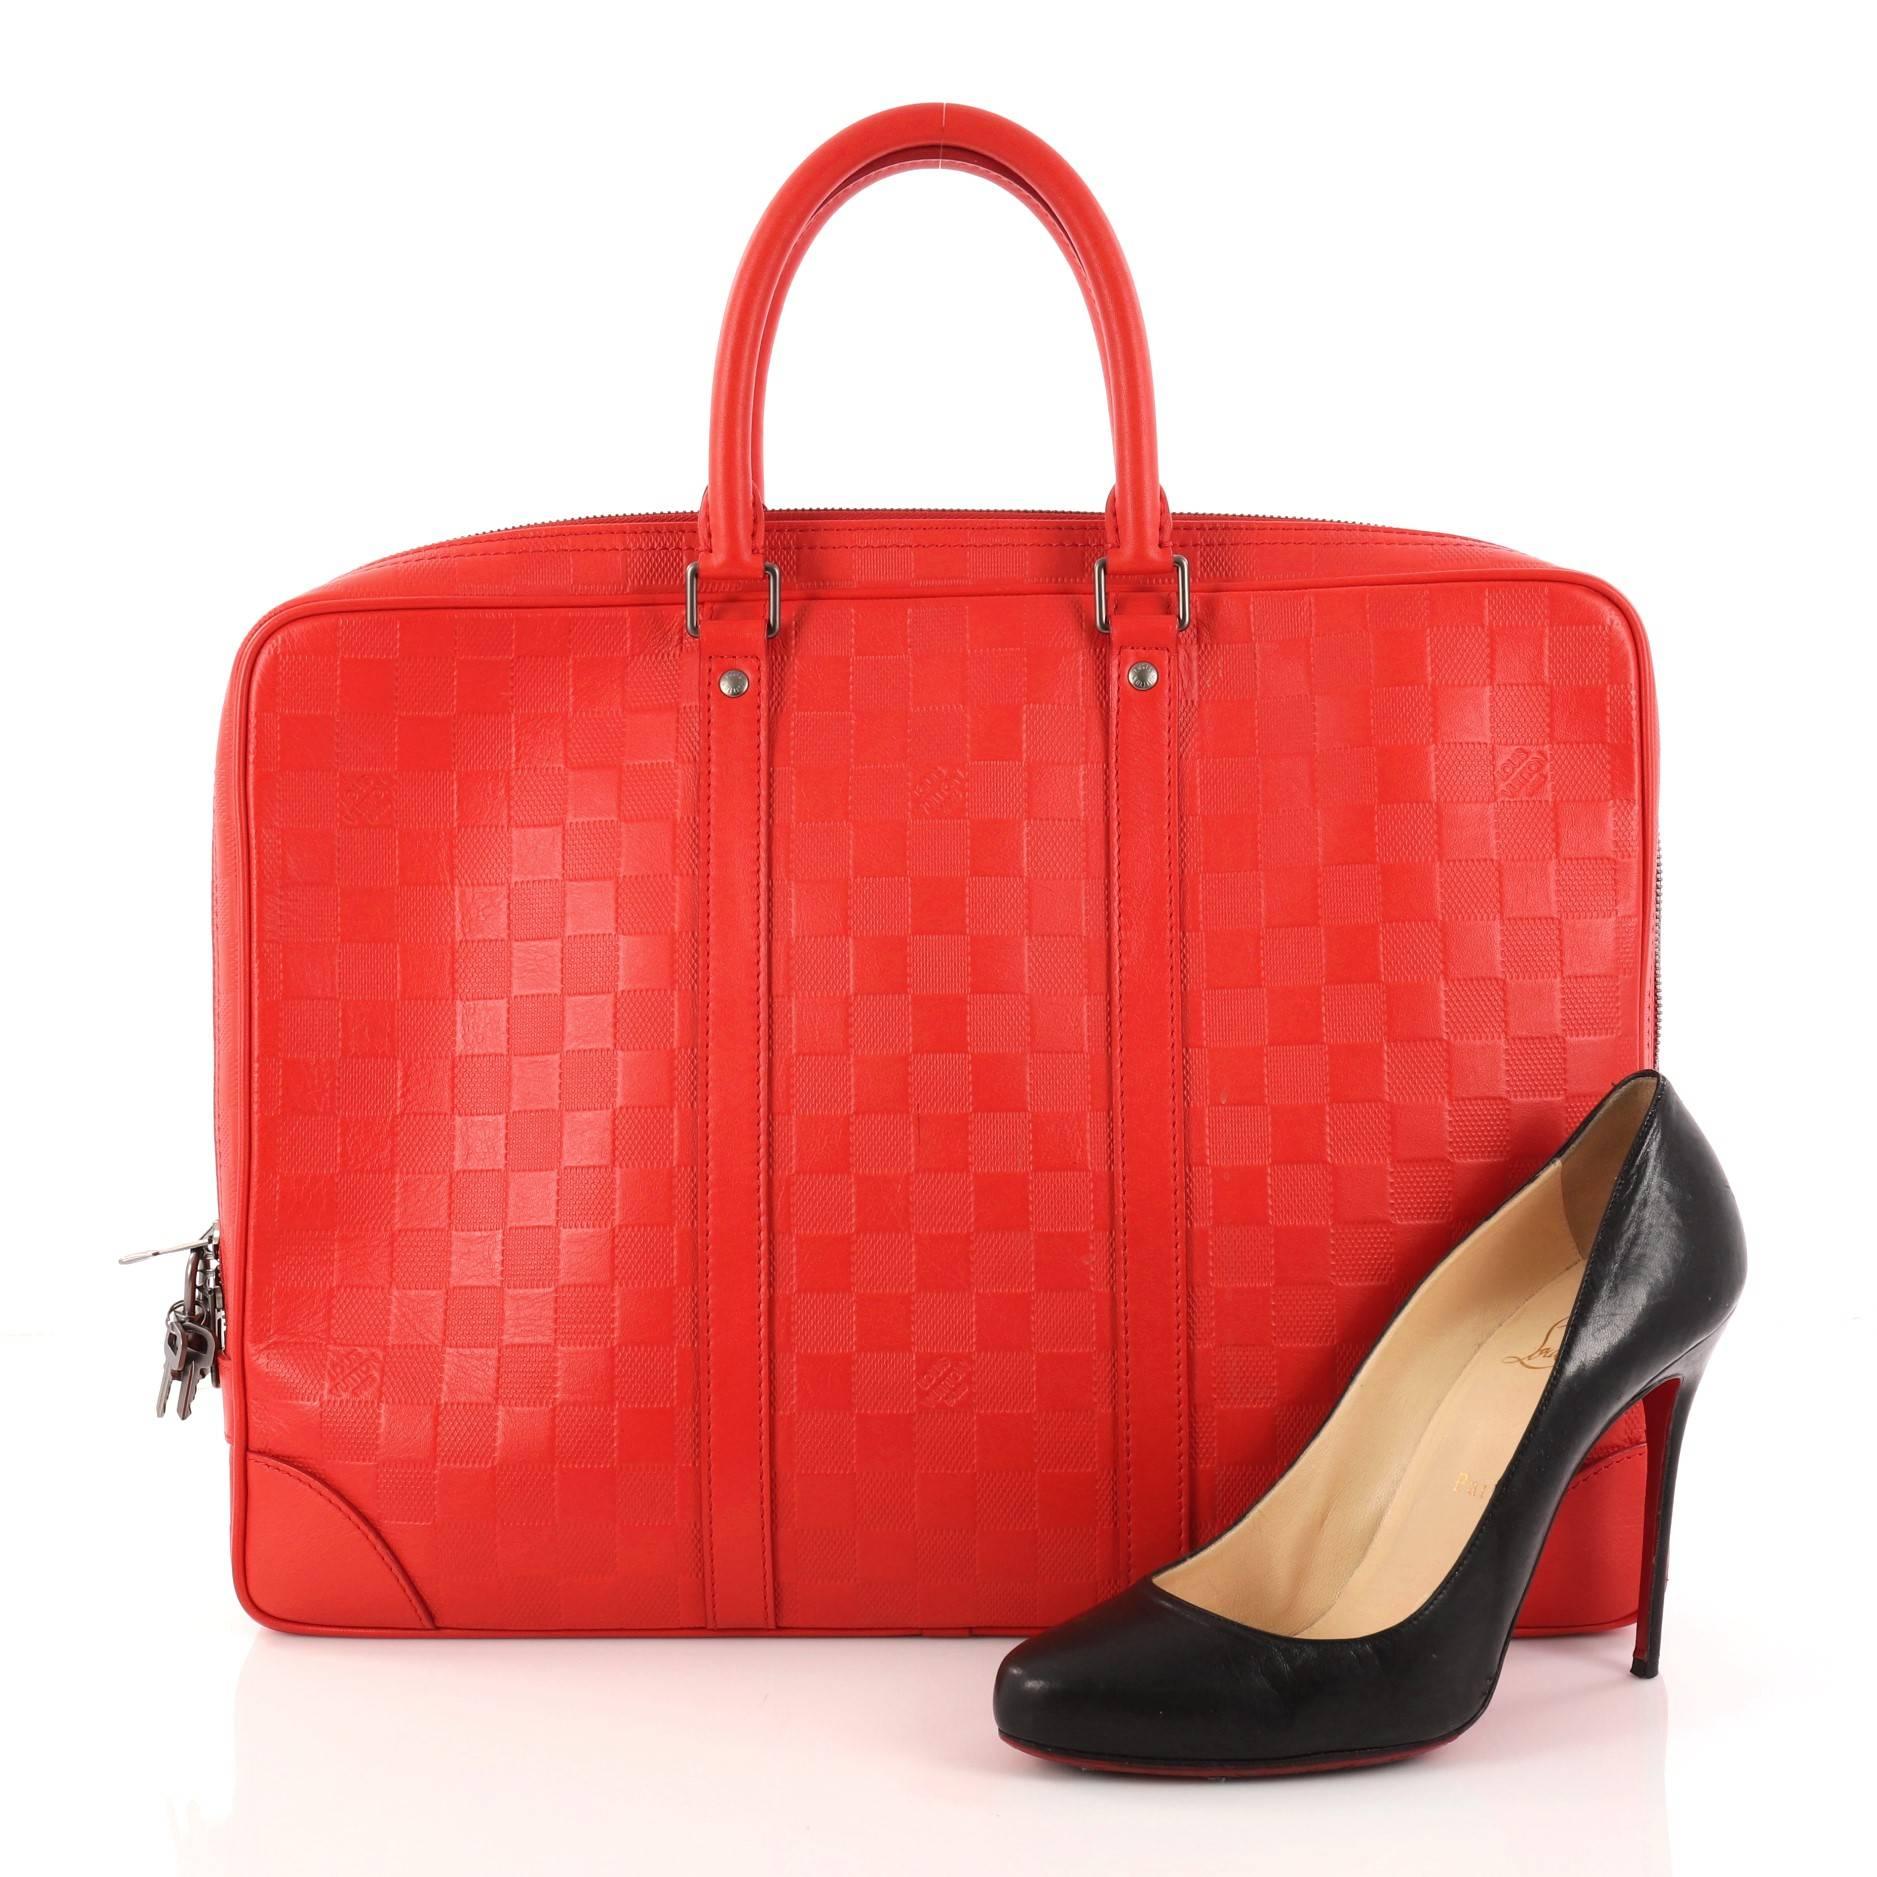 This authentic Louis Vuitton Porte-Documents Voyage Briefcase Damier Infini Leather updates its traditional men's briefcase with a luxurious and urban spin. Crafted in eye-catching design red damier infini leather, this functional contemporary bag